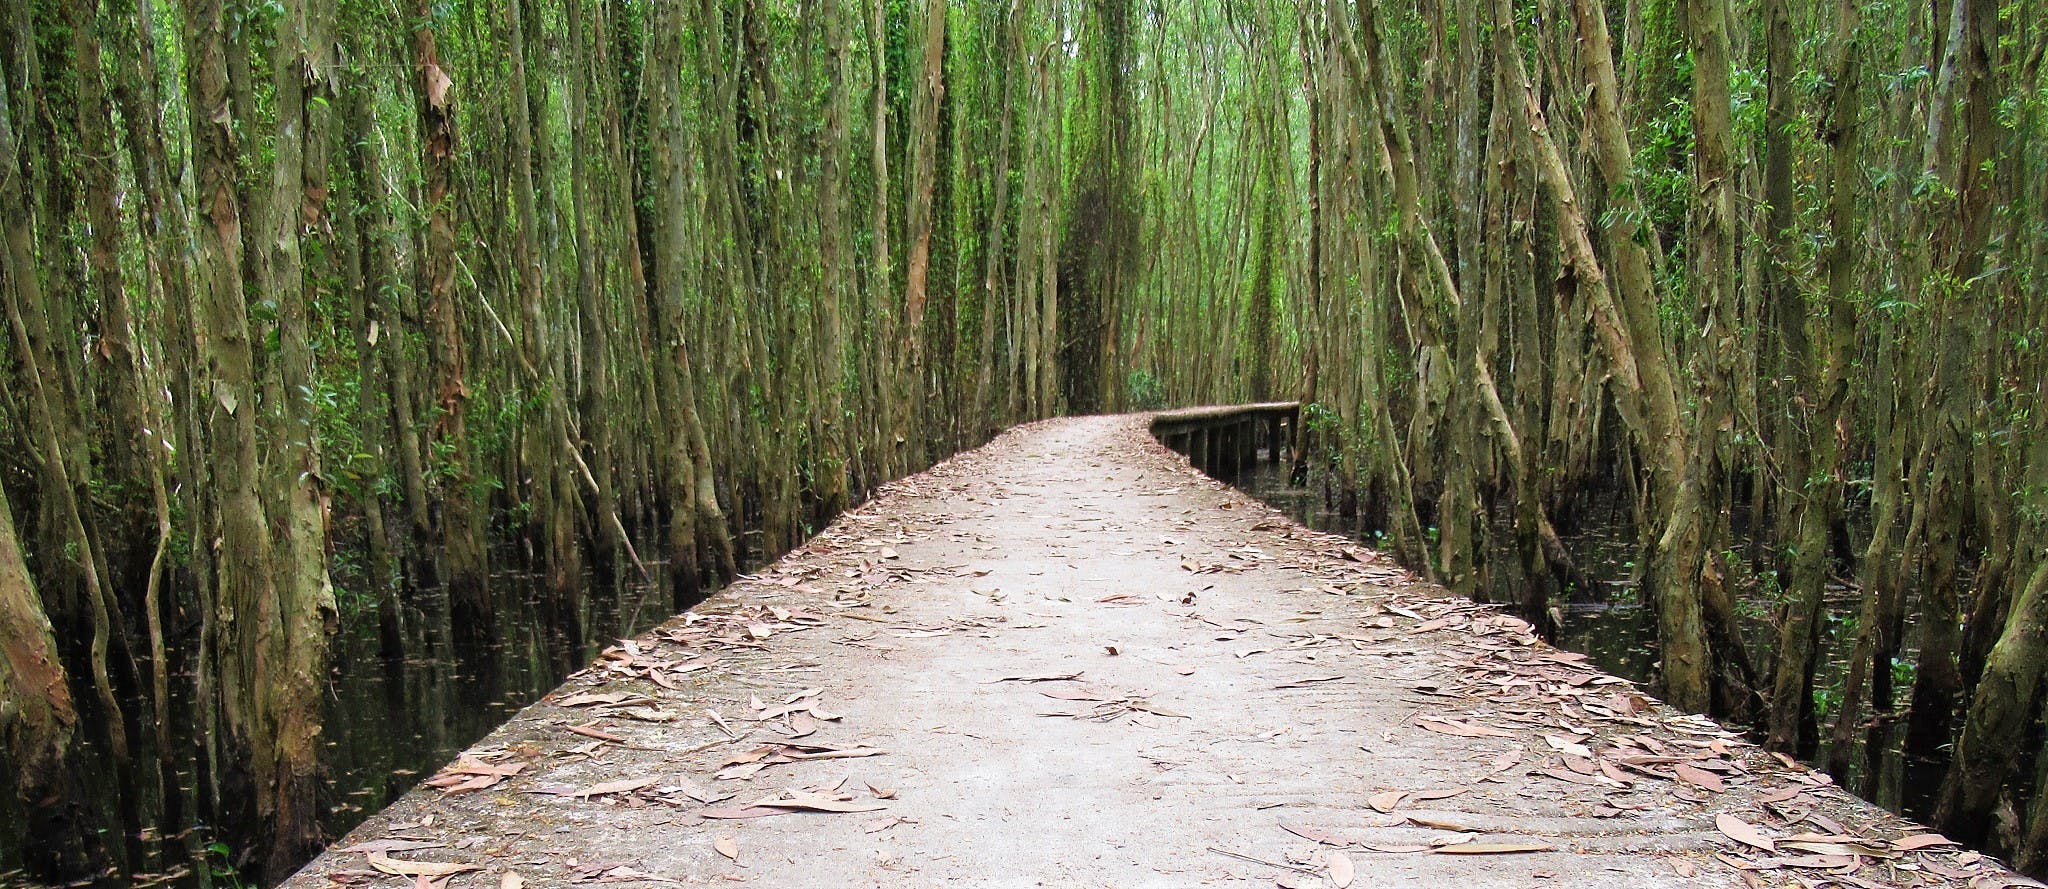 The Floating Forest of Tan Lap, Long An, Vietnam